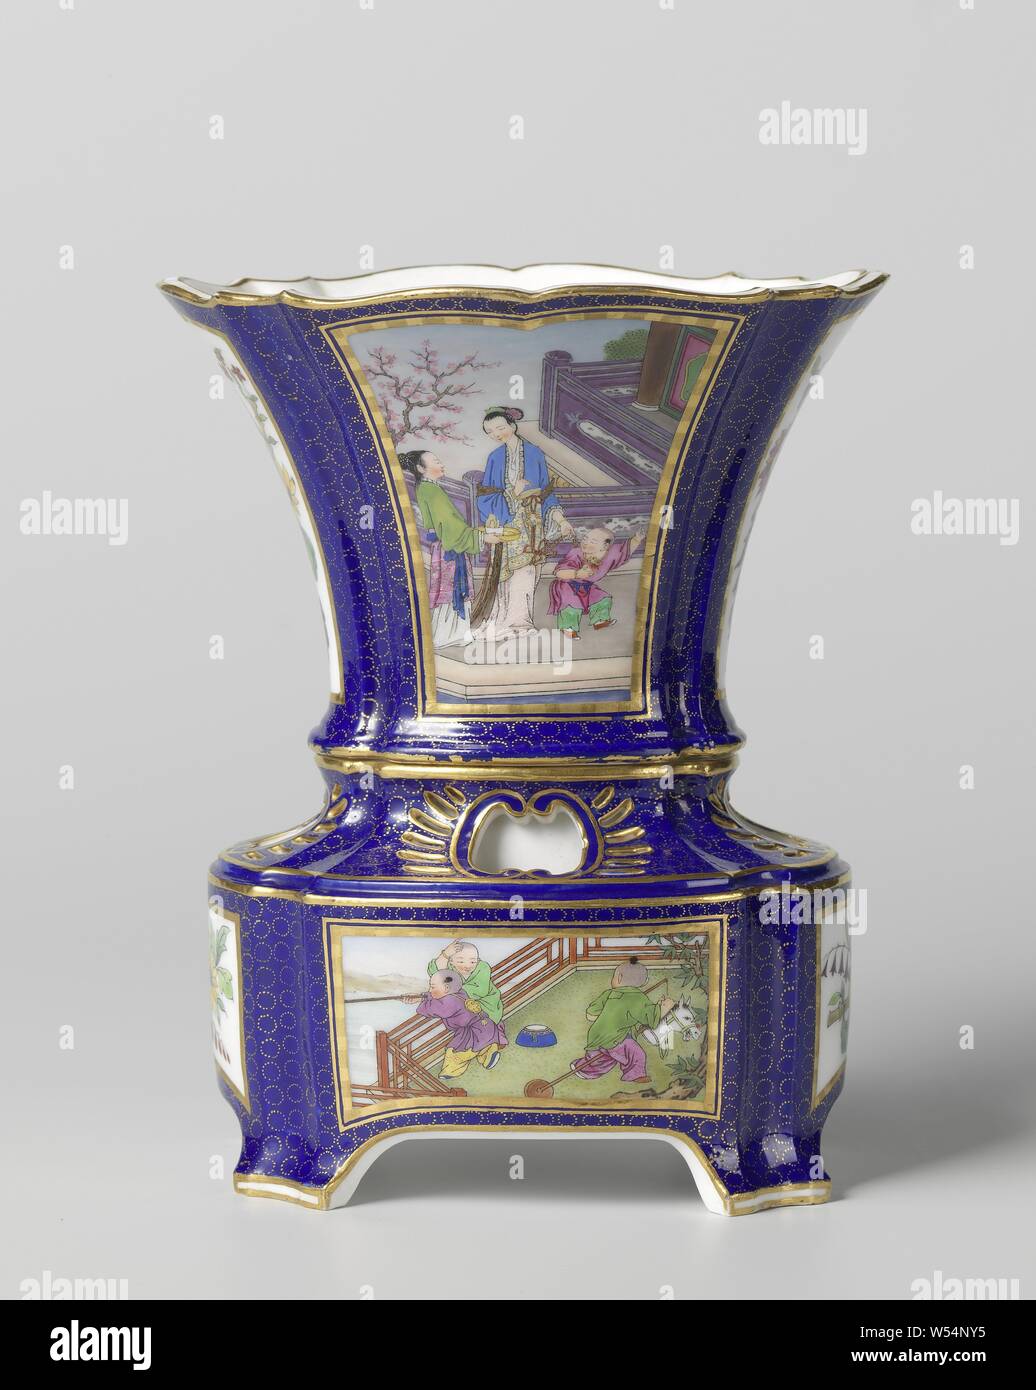 Page 2 - Sevres Vases High Resolution Stock Photography and Images - Alamy